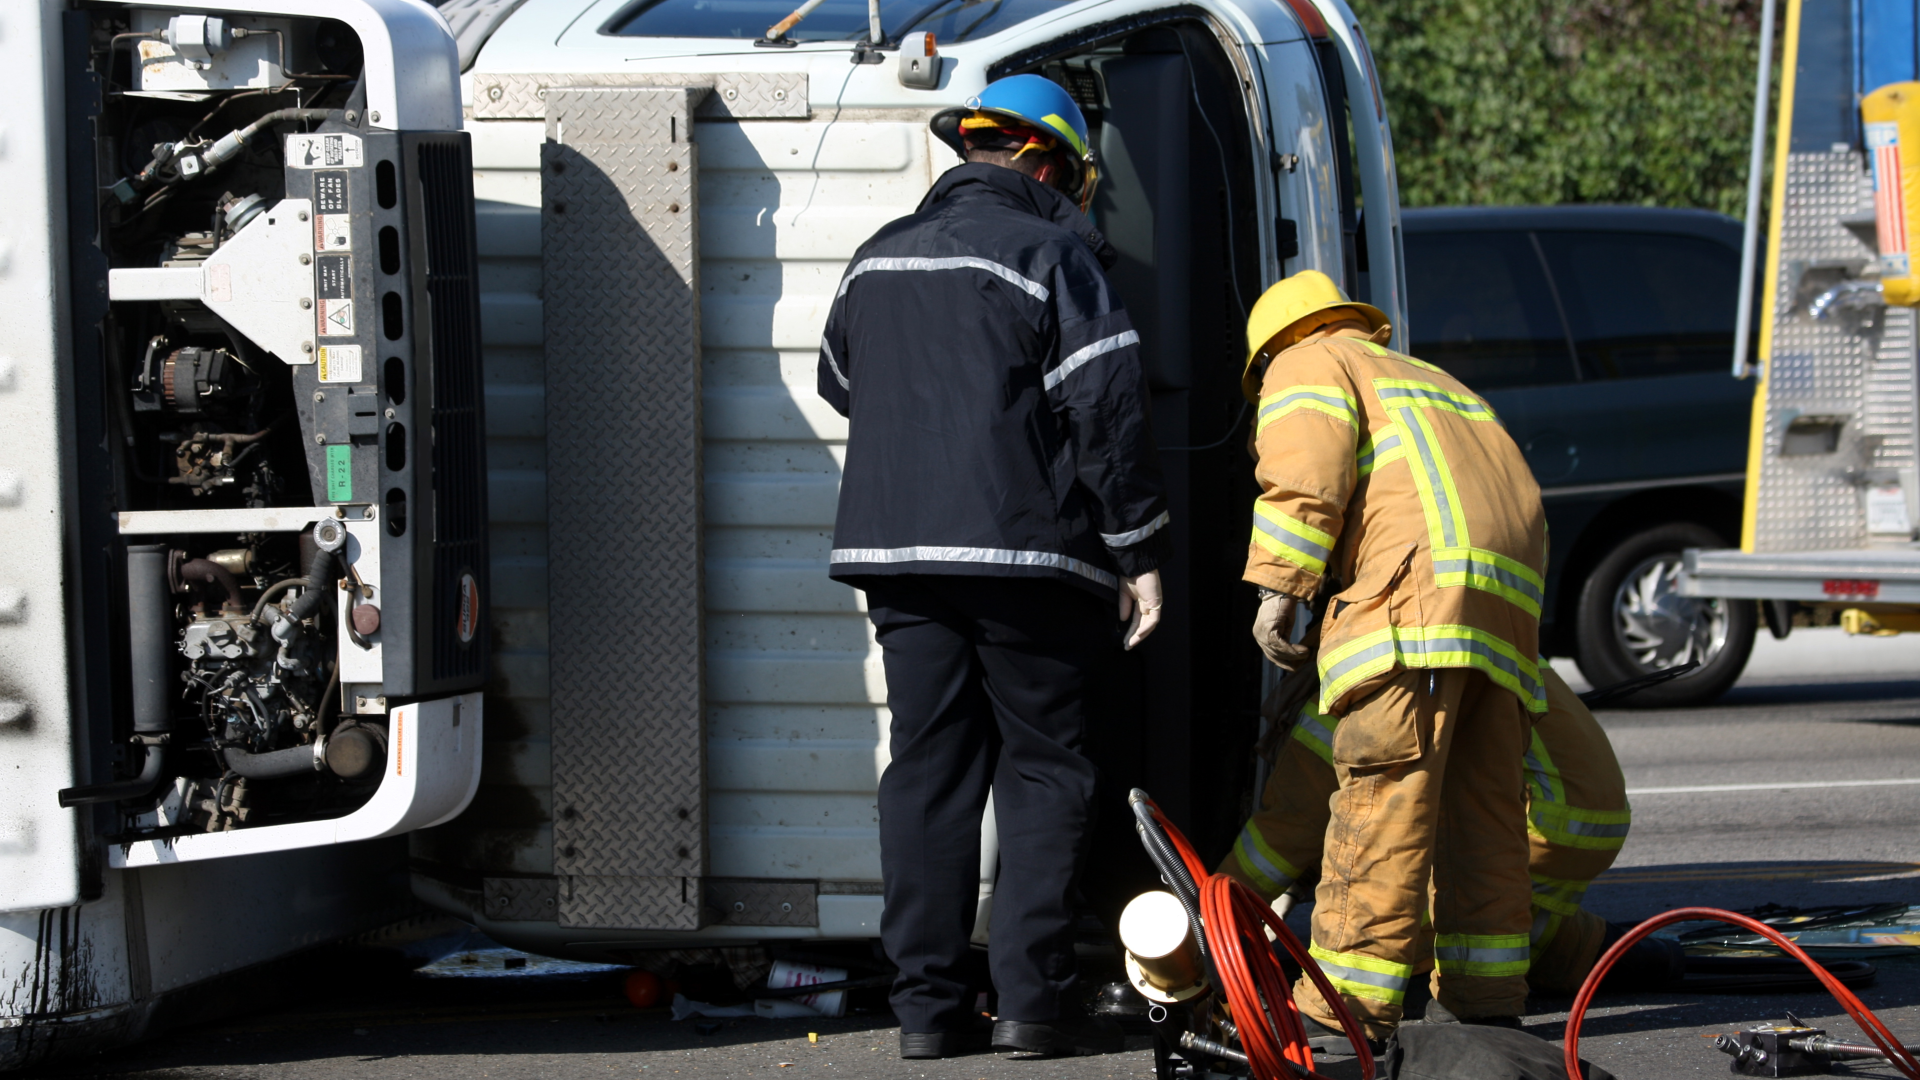 Firefighters at the scene of a truck accident